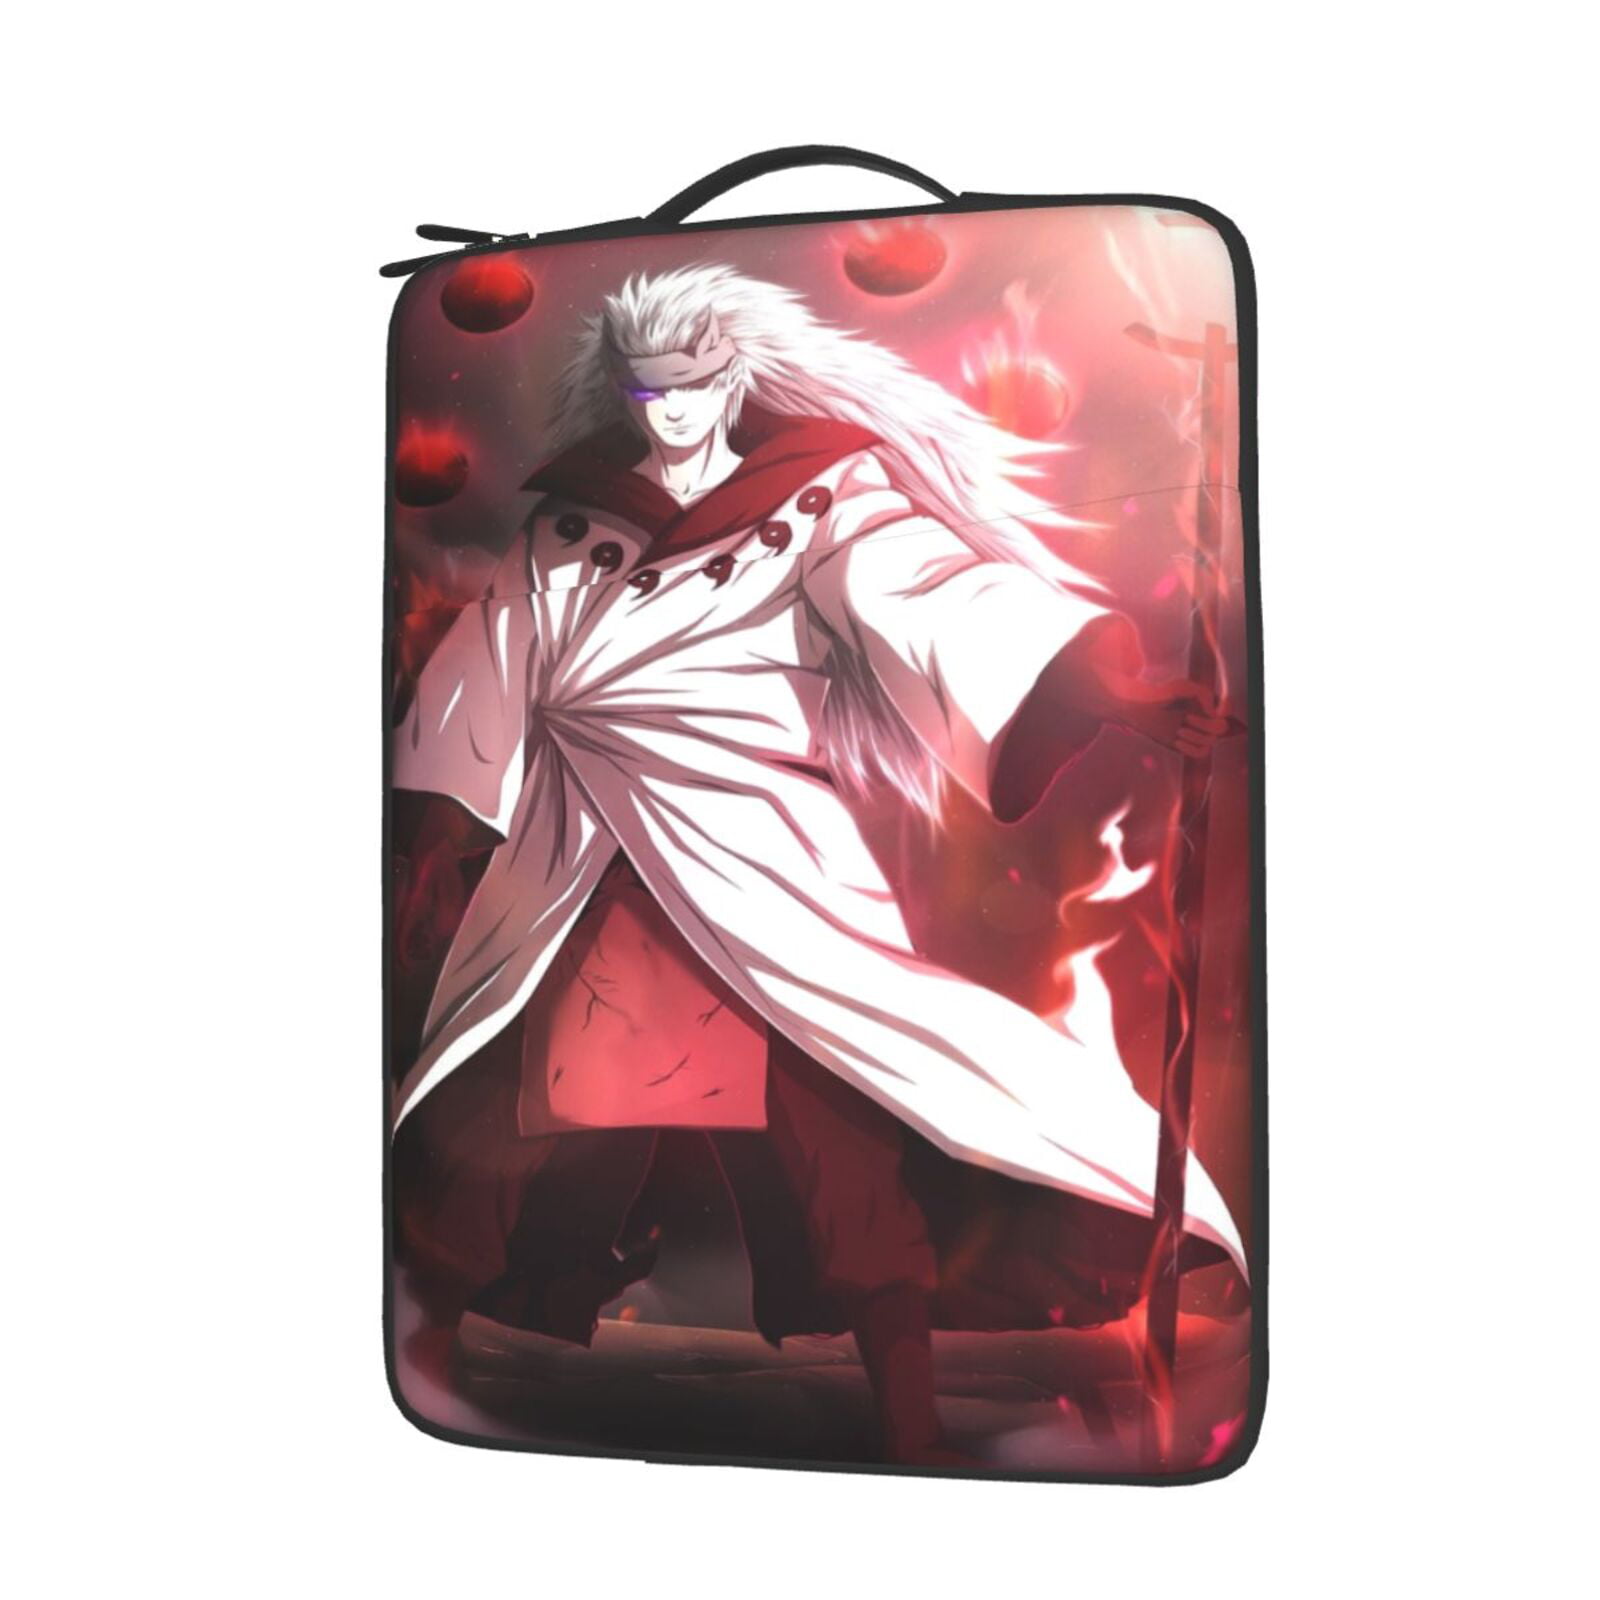 Anime Naruto 13-Inch to 15-Inch Laptop Sleeve Case Waterproof Notebook Computer Bag-Light and Comfortable Tablet Briefcase-Band Zipper Portable Handbag